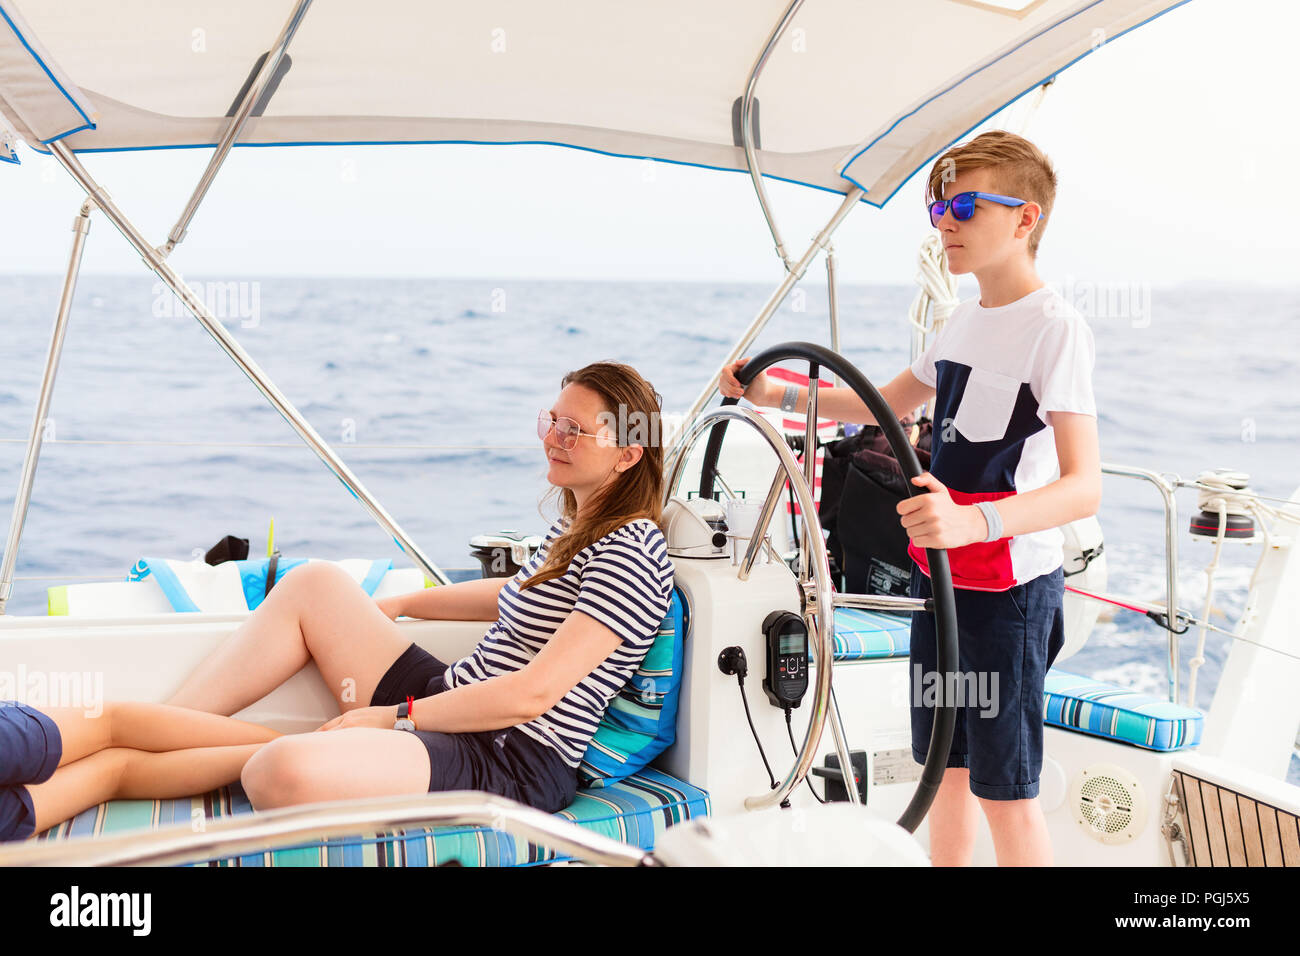 Family of mother and son on board of sailing yacht having summer travel adventure Stock Photo